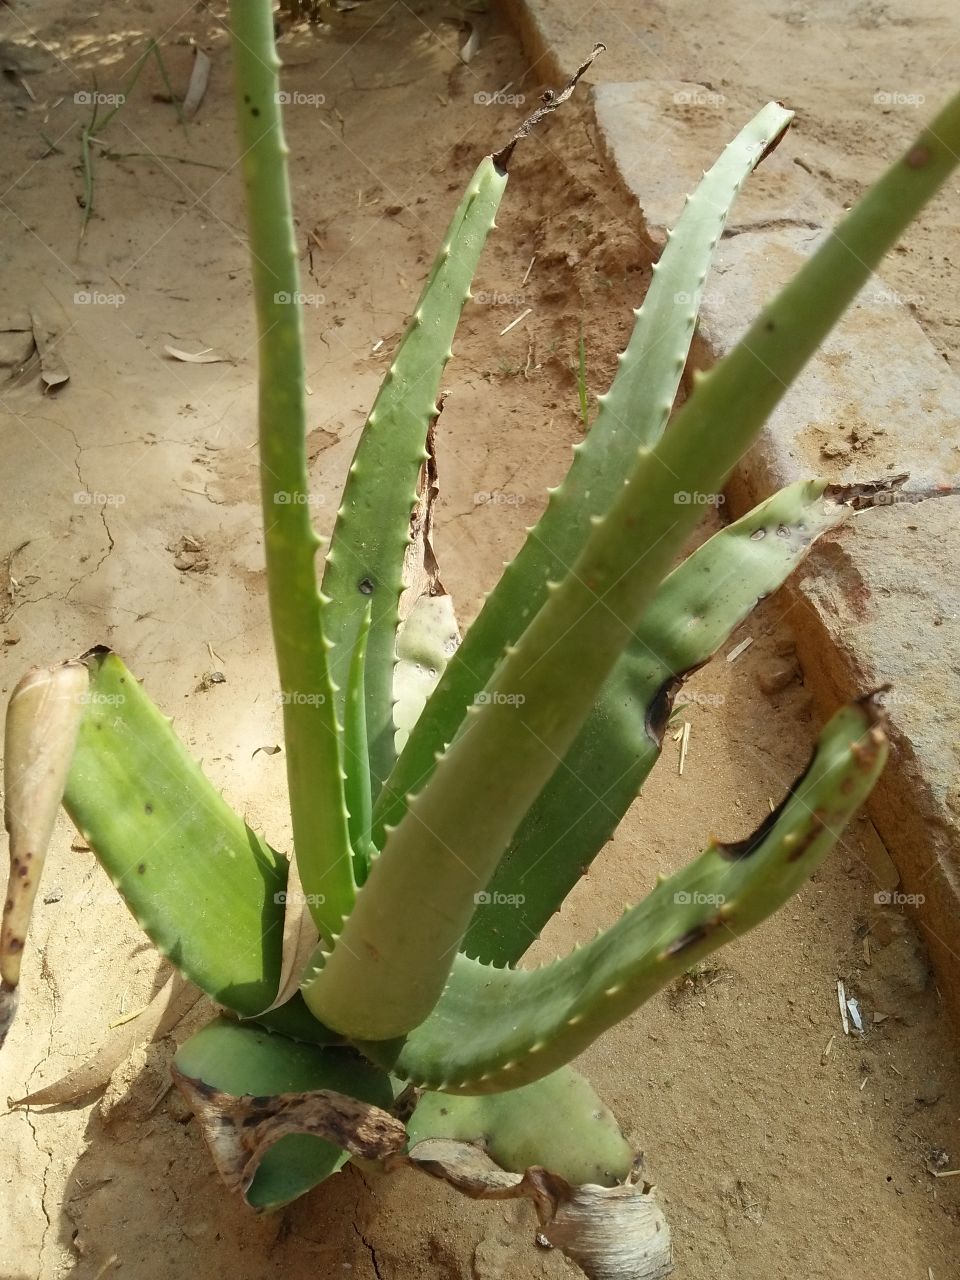 aloe vera is used for vigor, wellness and medicinal purposes since rigvedic times.health benefits of aloe Vera .the plant can be harvested every6-8weeks by removing 3-4 leaves per plant🌵